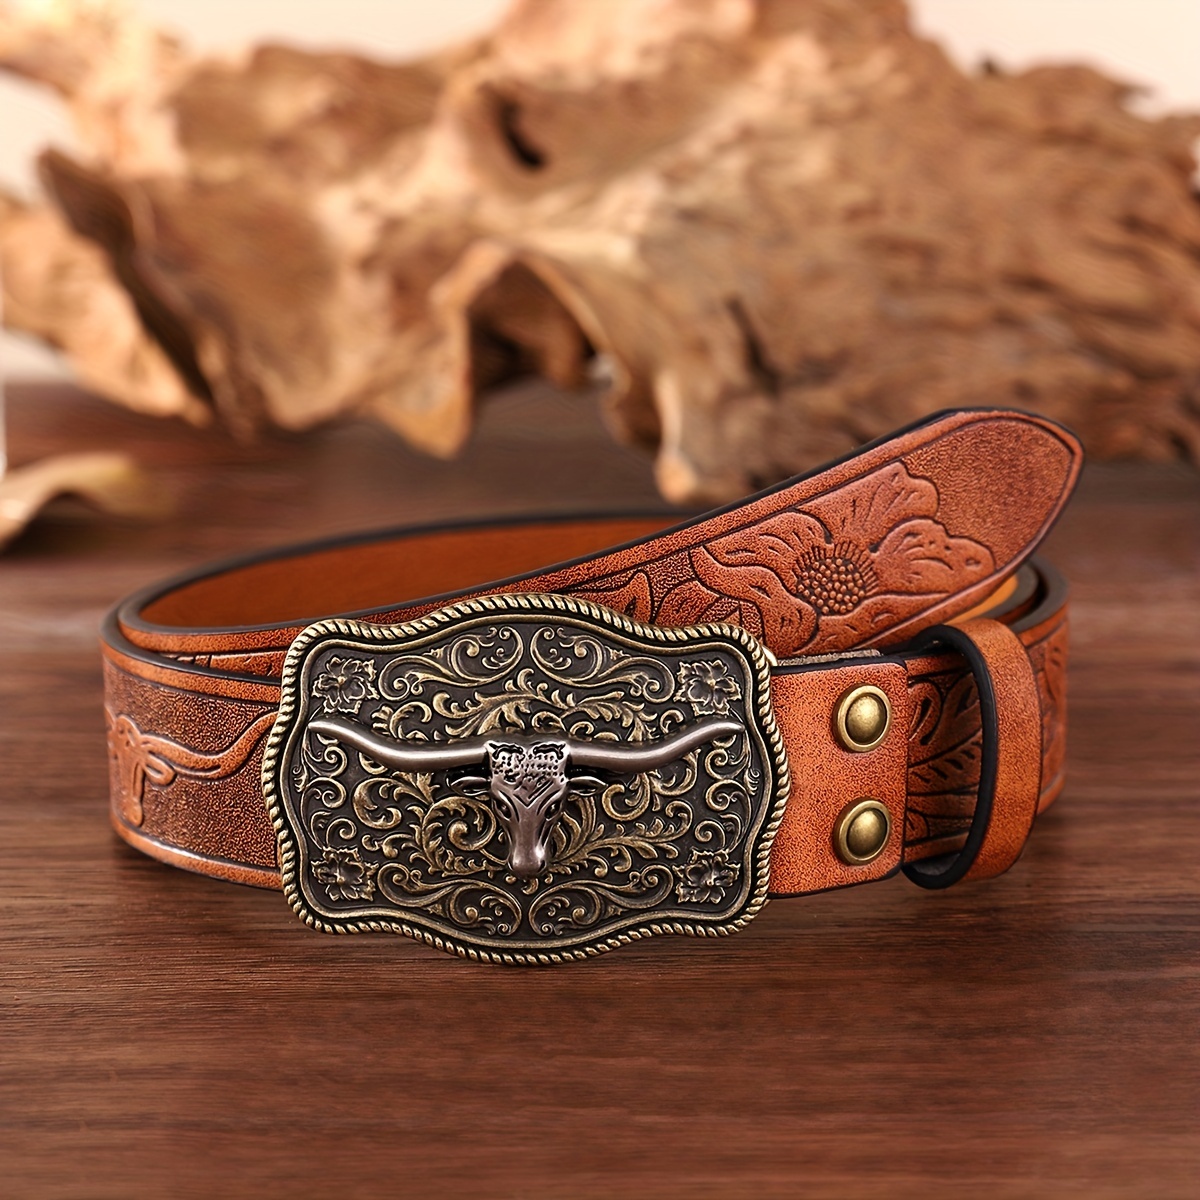 Can you wear designer belts instead of a cowboy belt with a cowboy